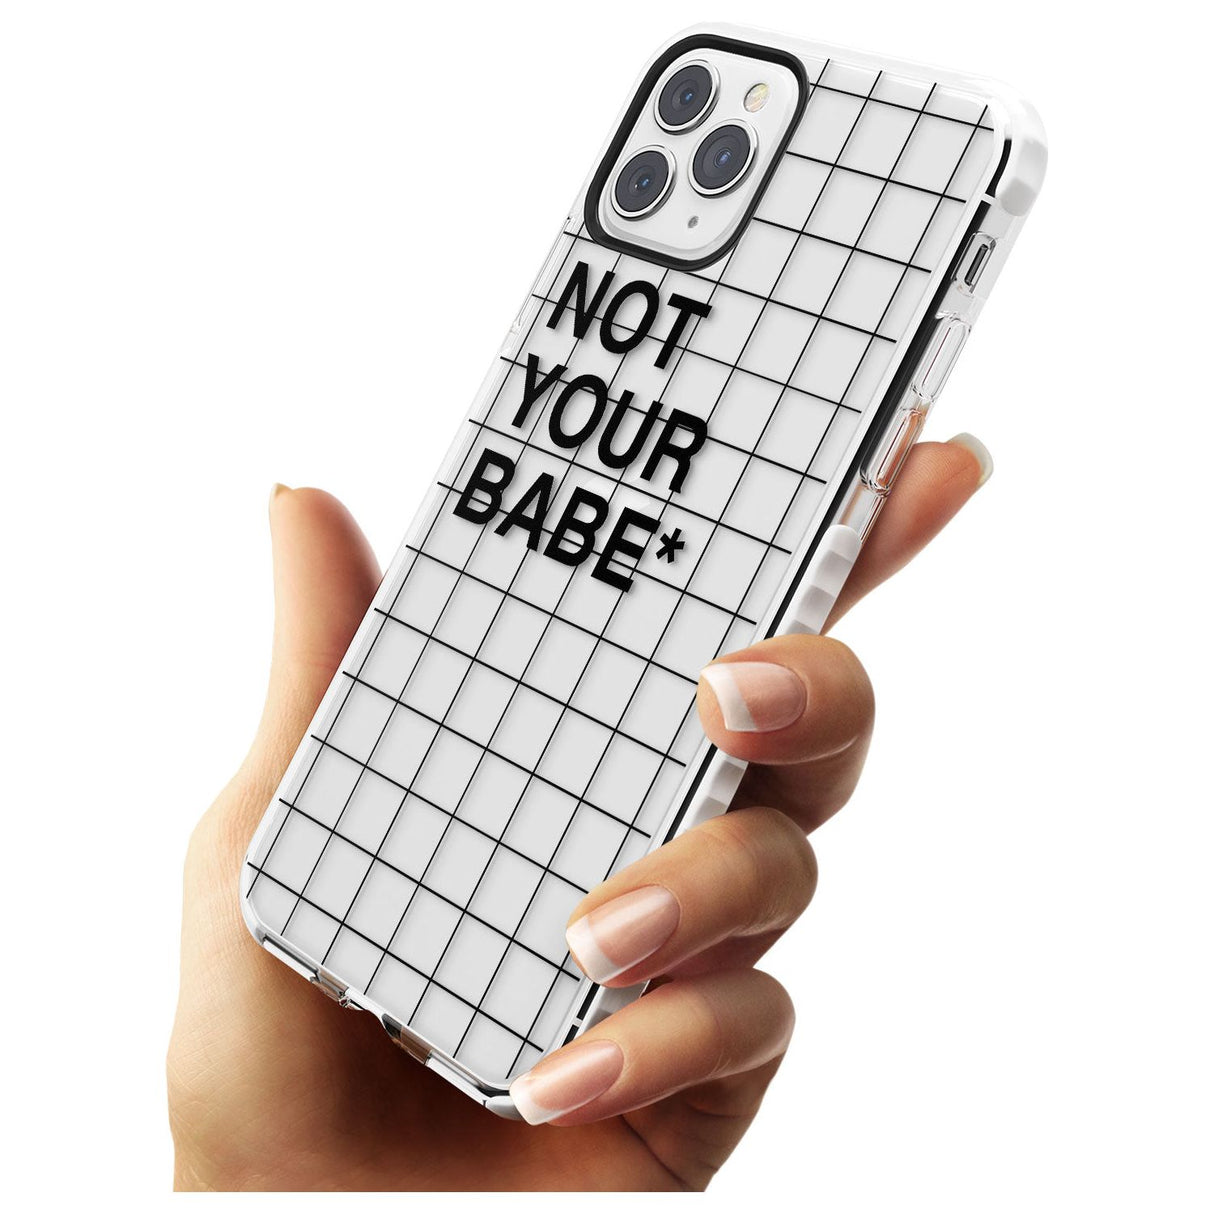 Grid Pattern Not Your Babe Impact Phone Case for iPhone 11 Pro Max